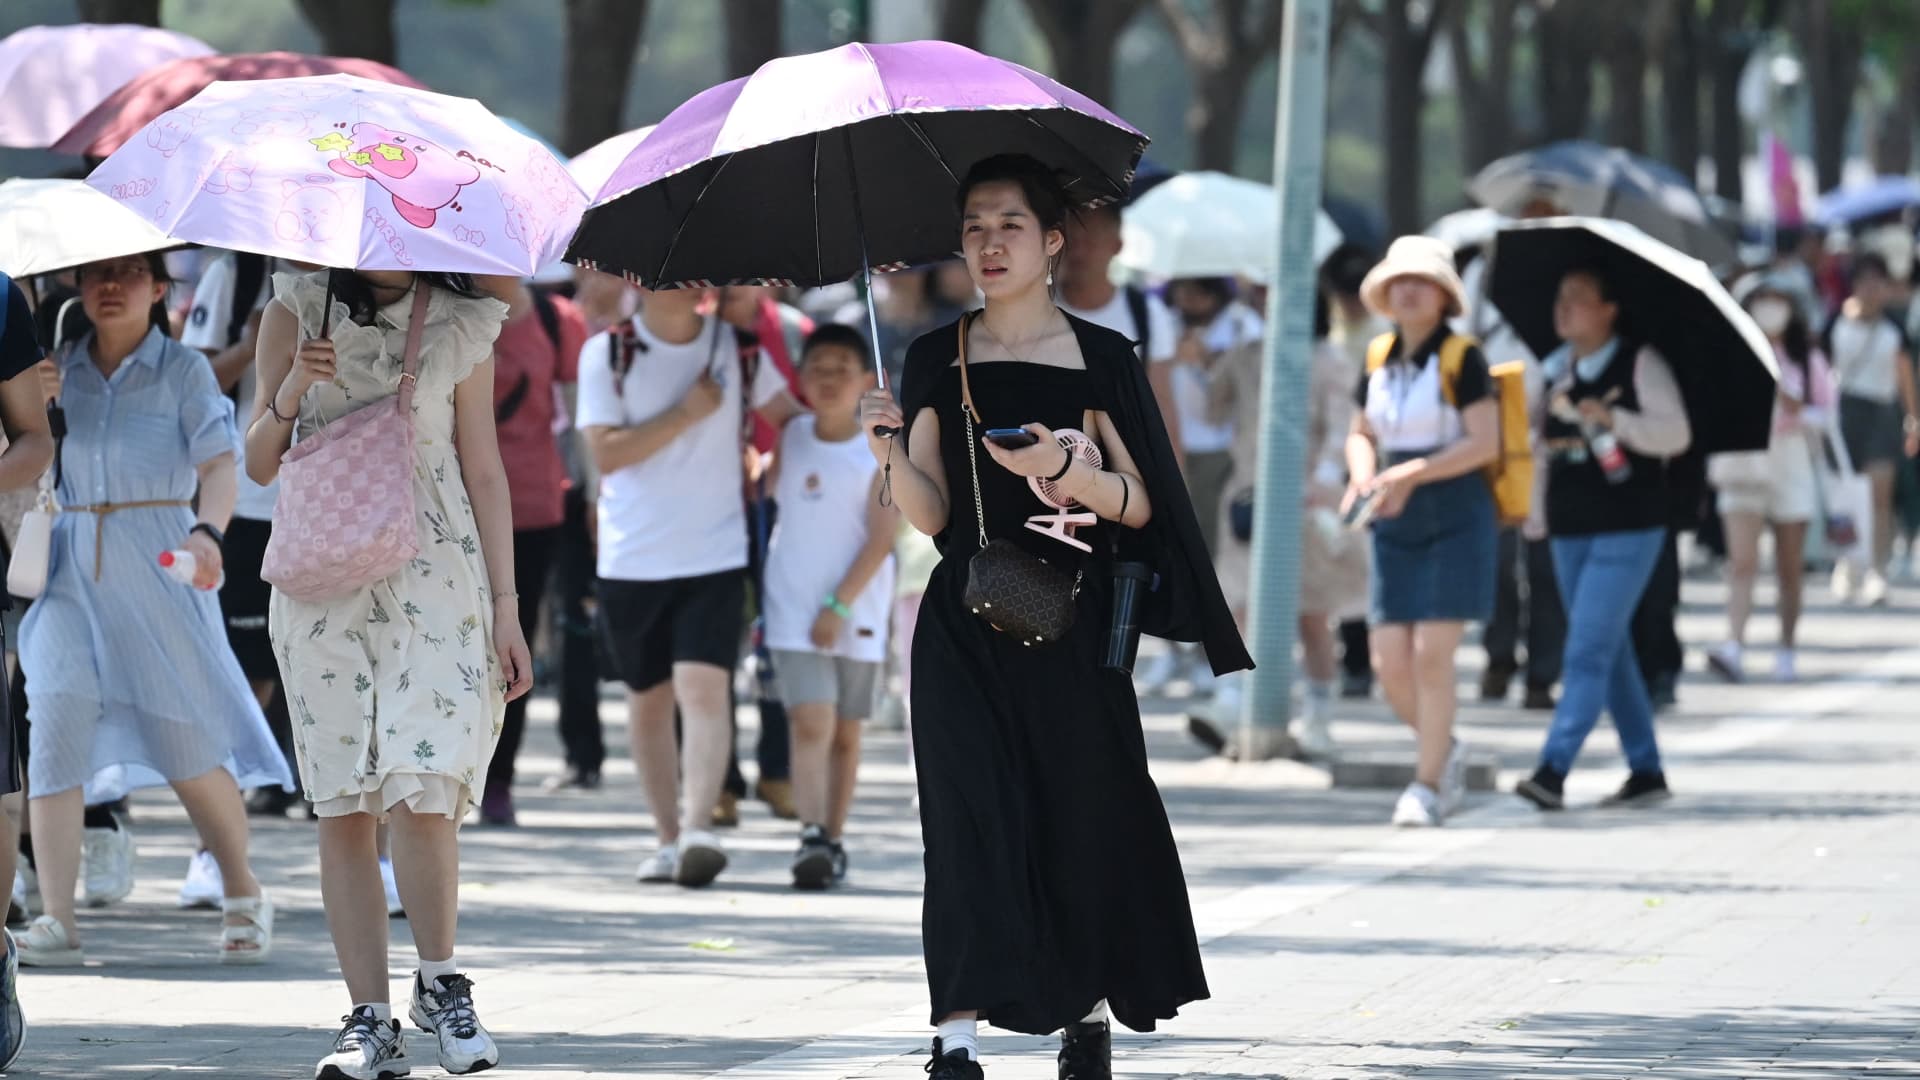 People shelter from the sun under umbrellas after visiting the Forbidden City during a heatwave in Beijing on June 24, 2023. Beijing recorded its third consecutive day of 40 degree Celsius weather, the first time since records began.